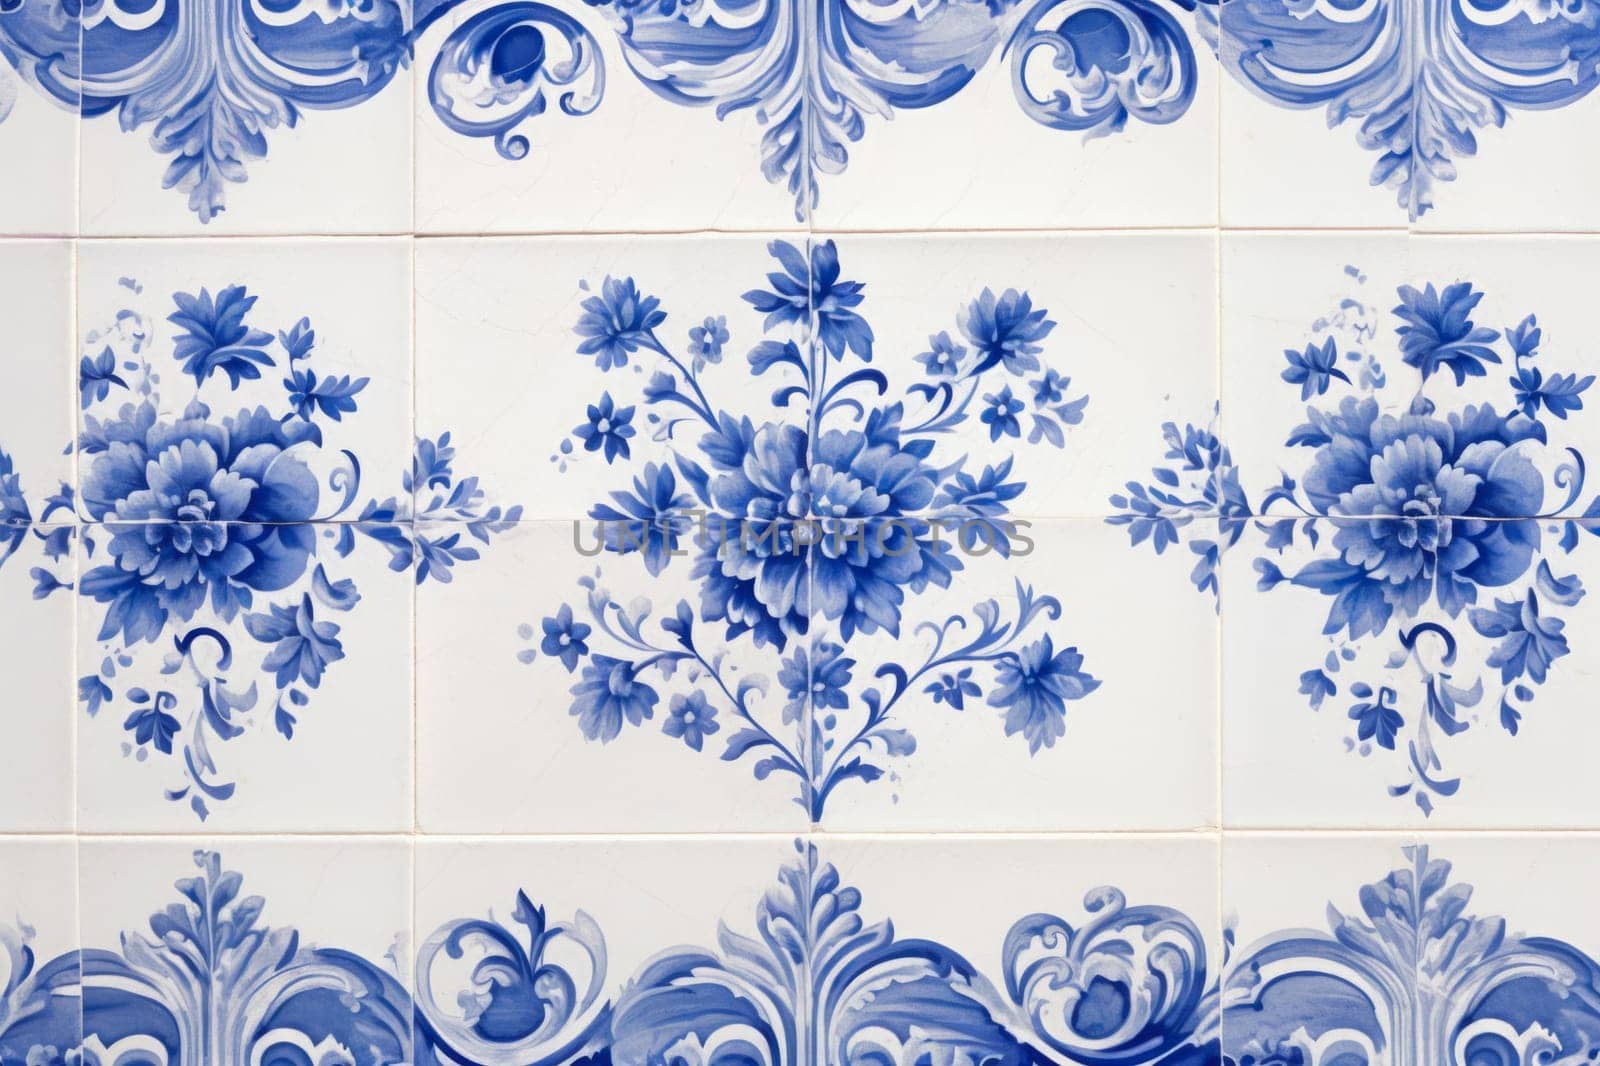 Typical old tiles of Portugal, detail of a classic ceramic tiles azulejos by Godi